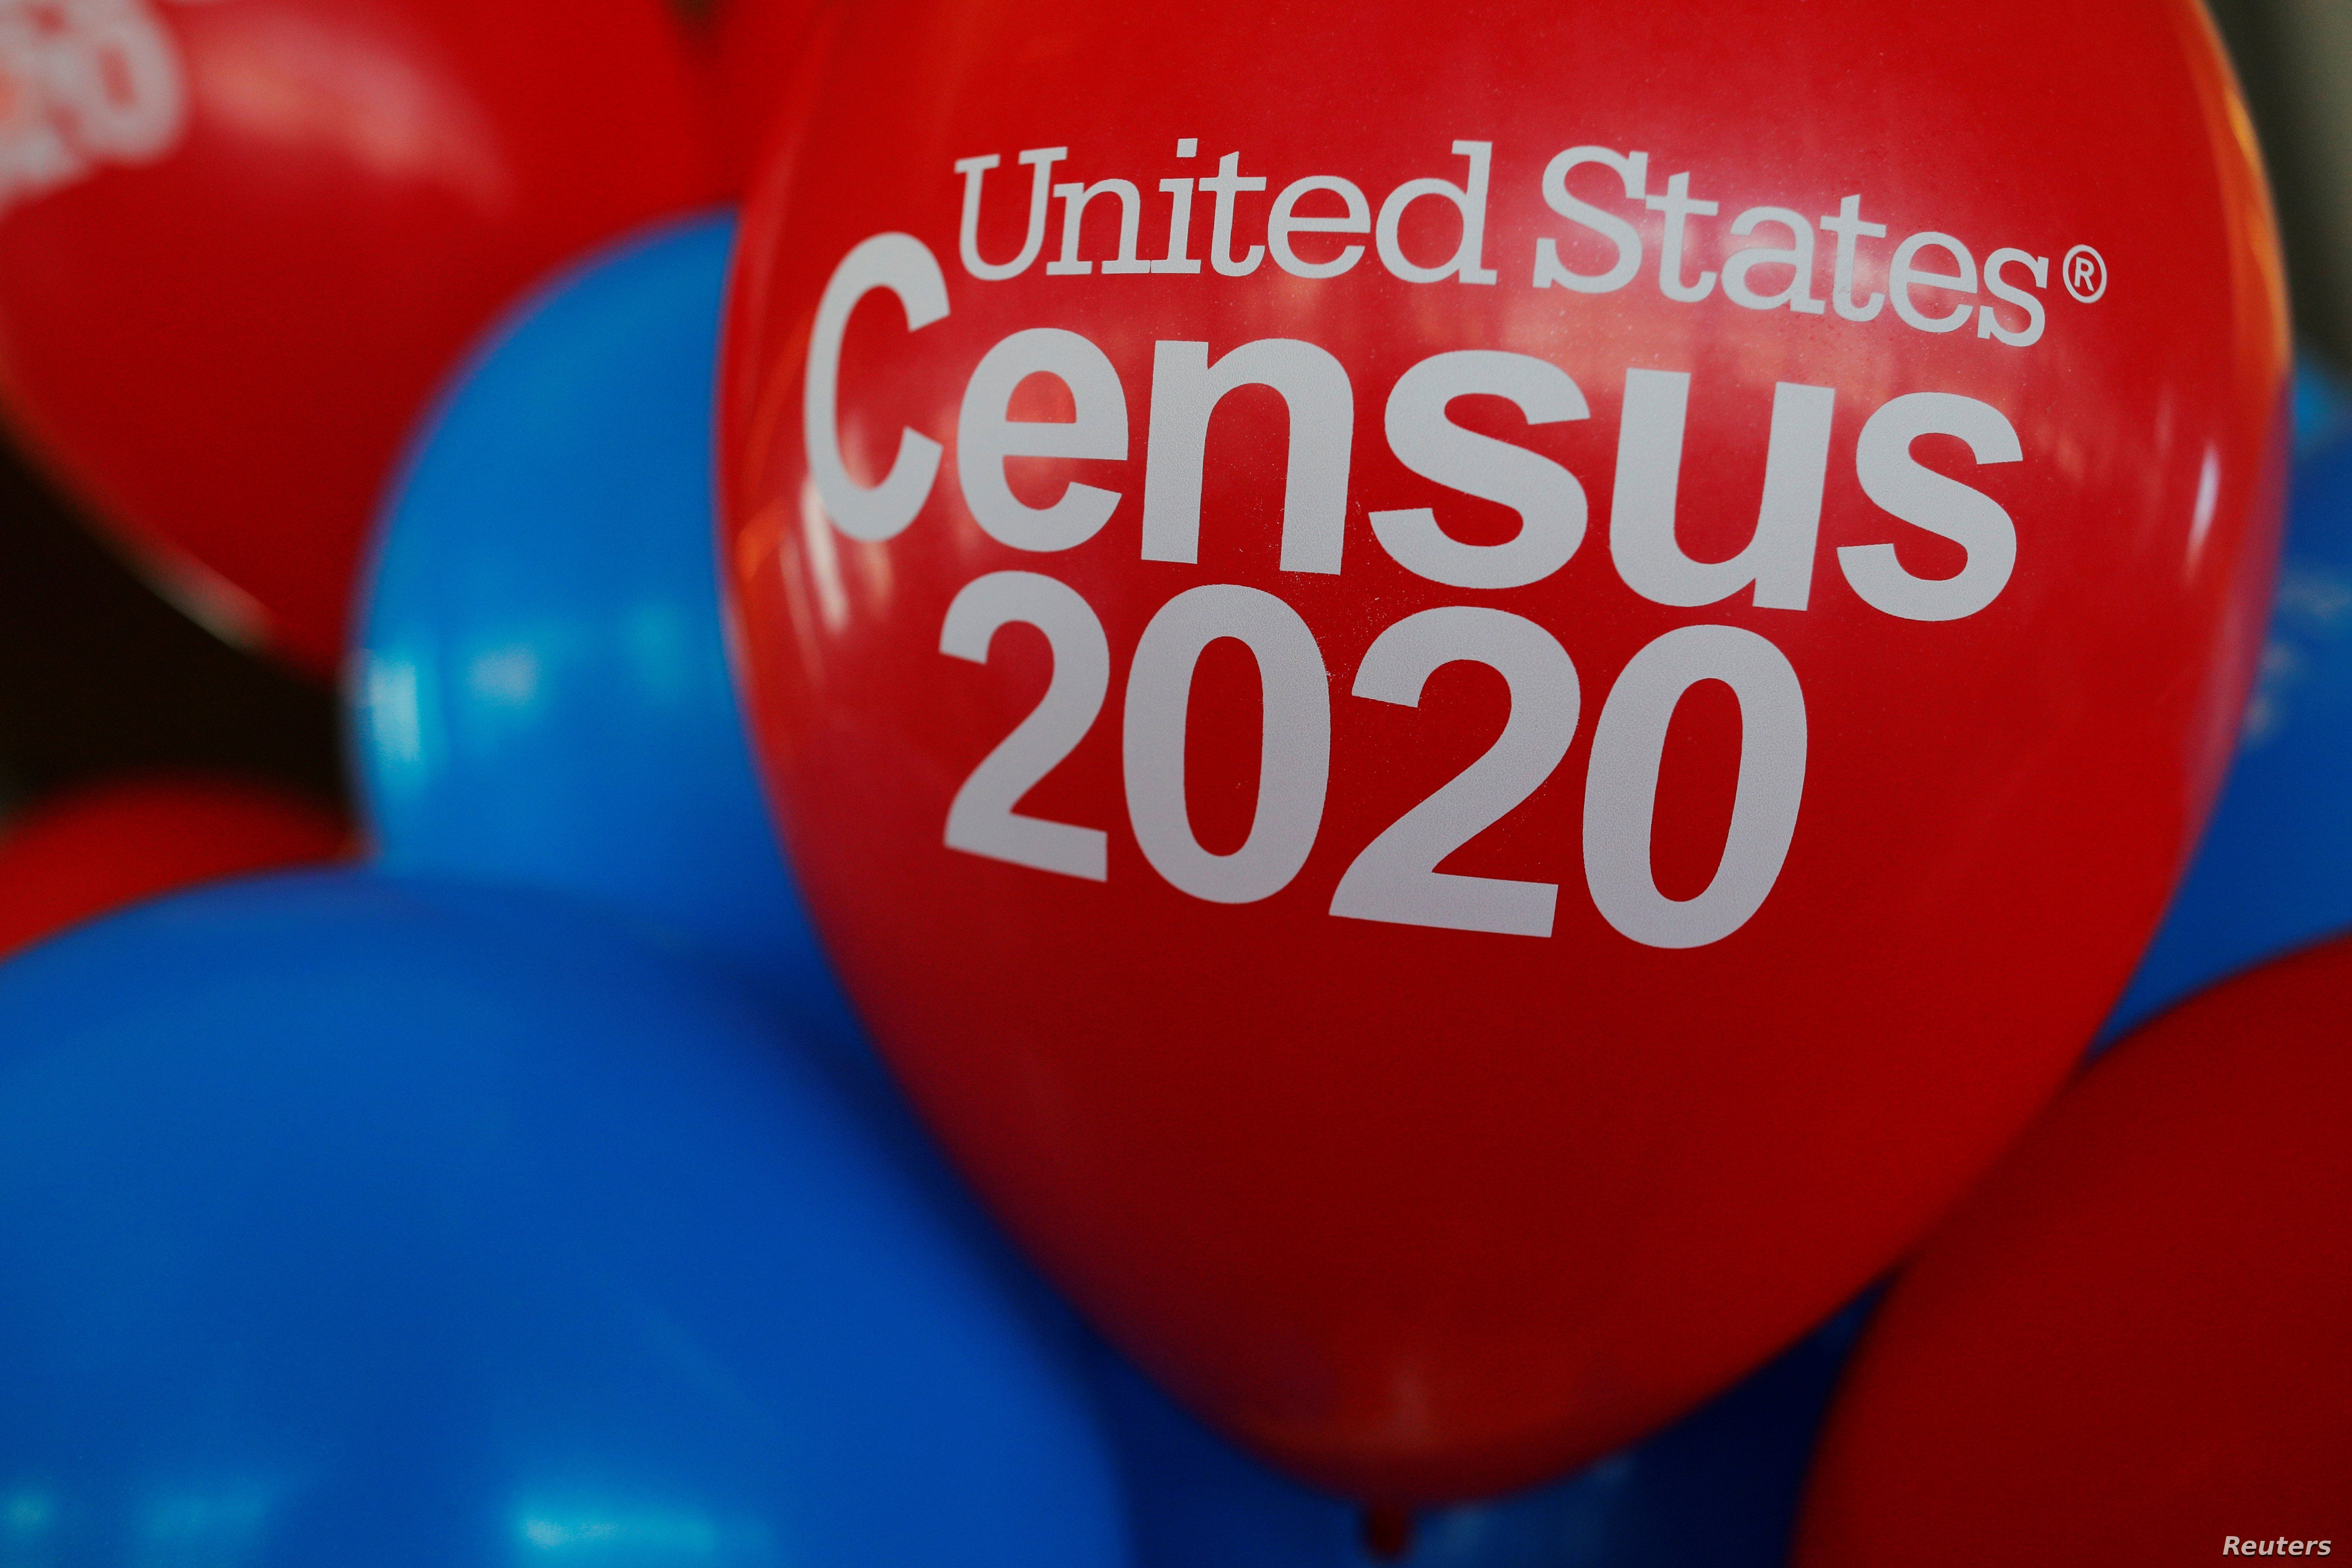 FILE PHOTO: Balloons decorate an event for community activists and local government leaders to mark the one-year-out launch of the 2020 Census efforts in Boston.